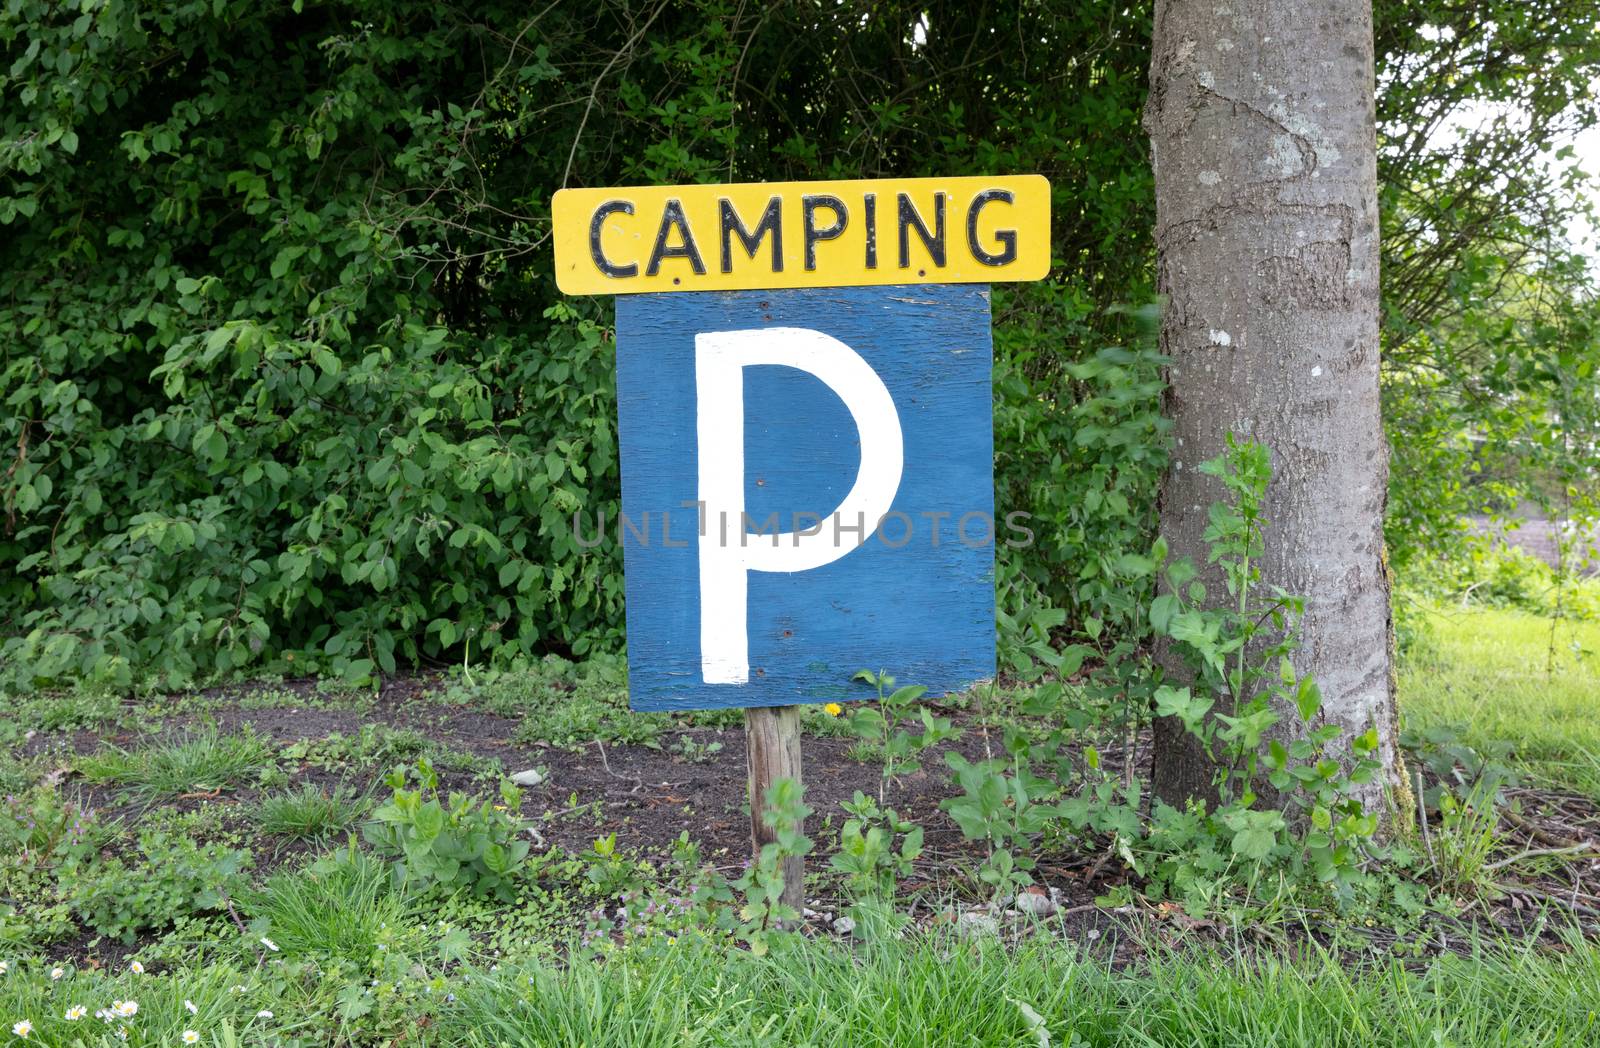 Empty camping site in the Netherlands, big sign